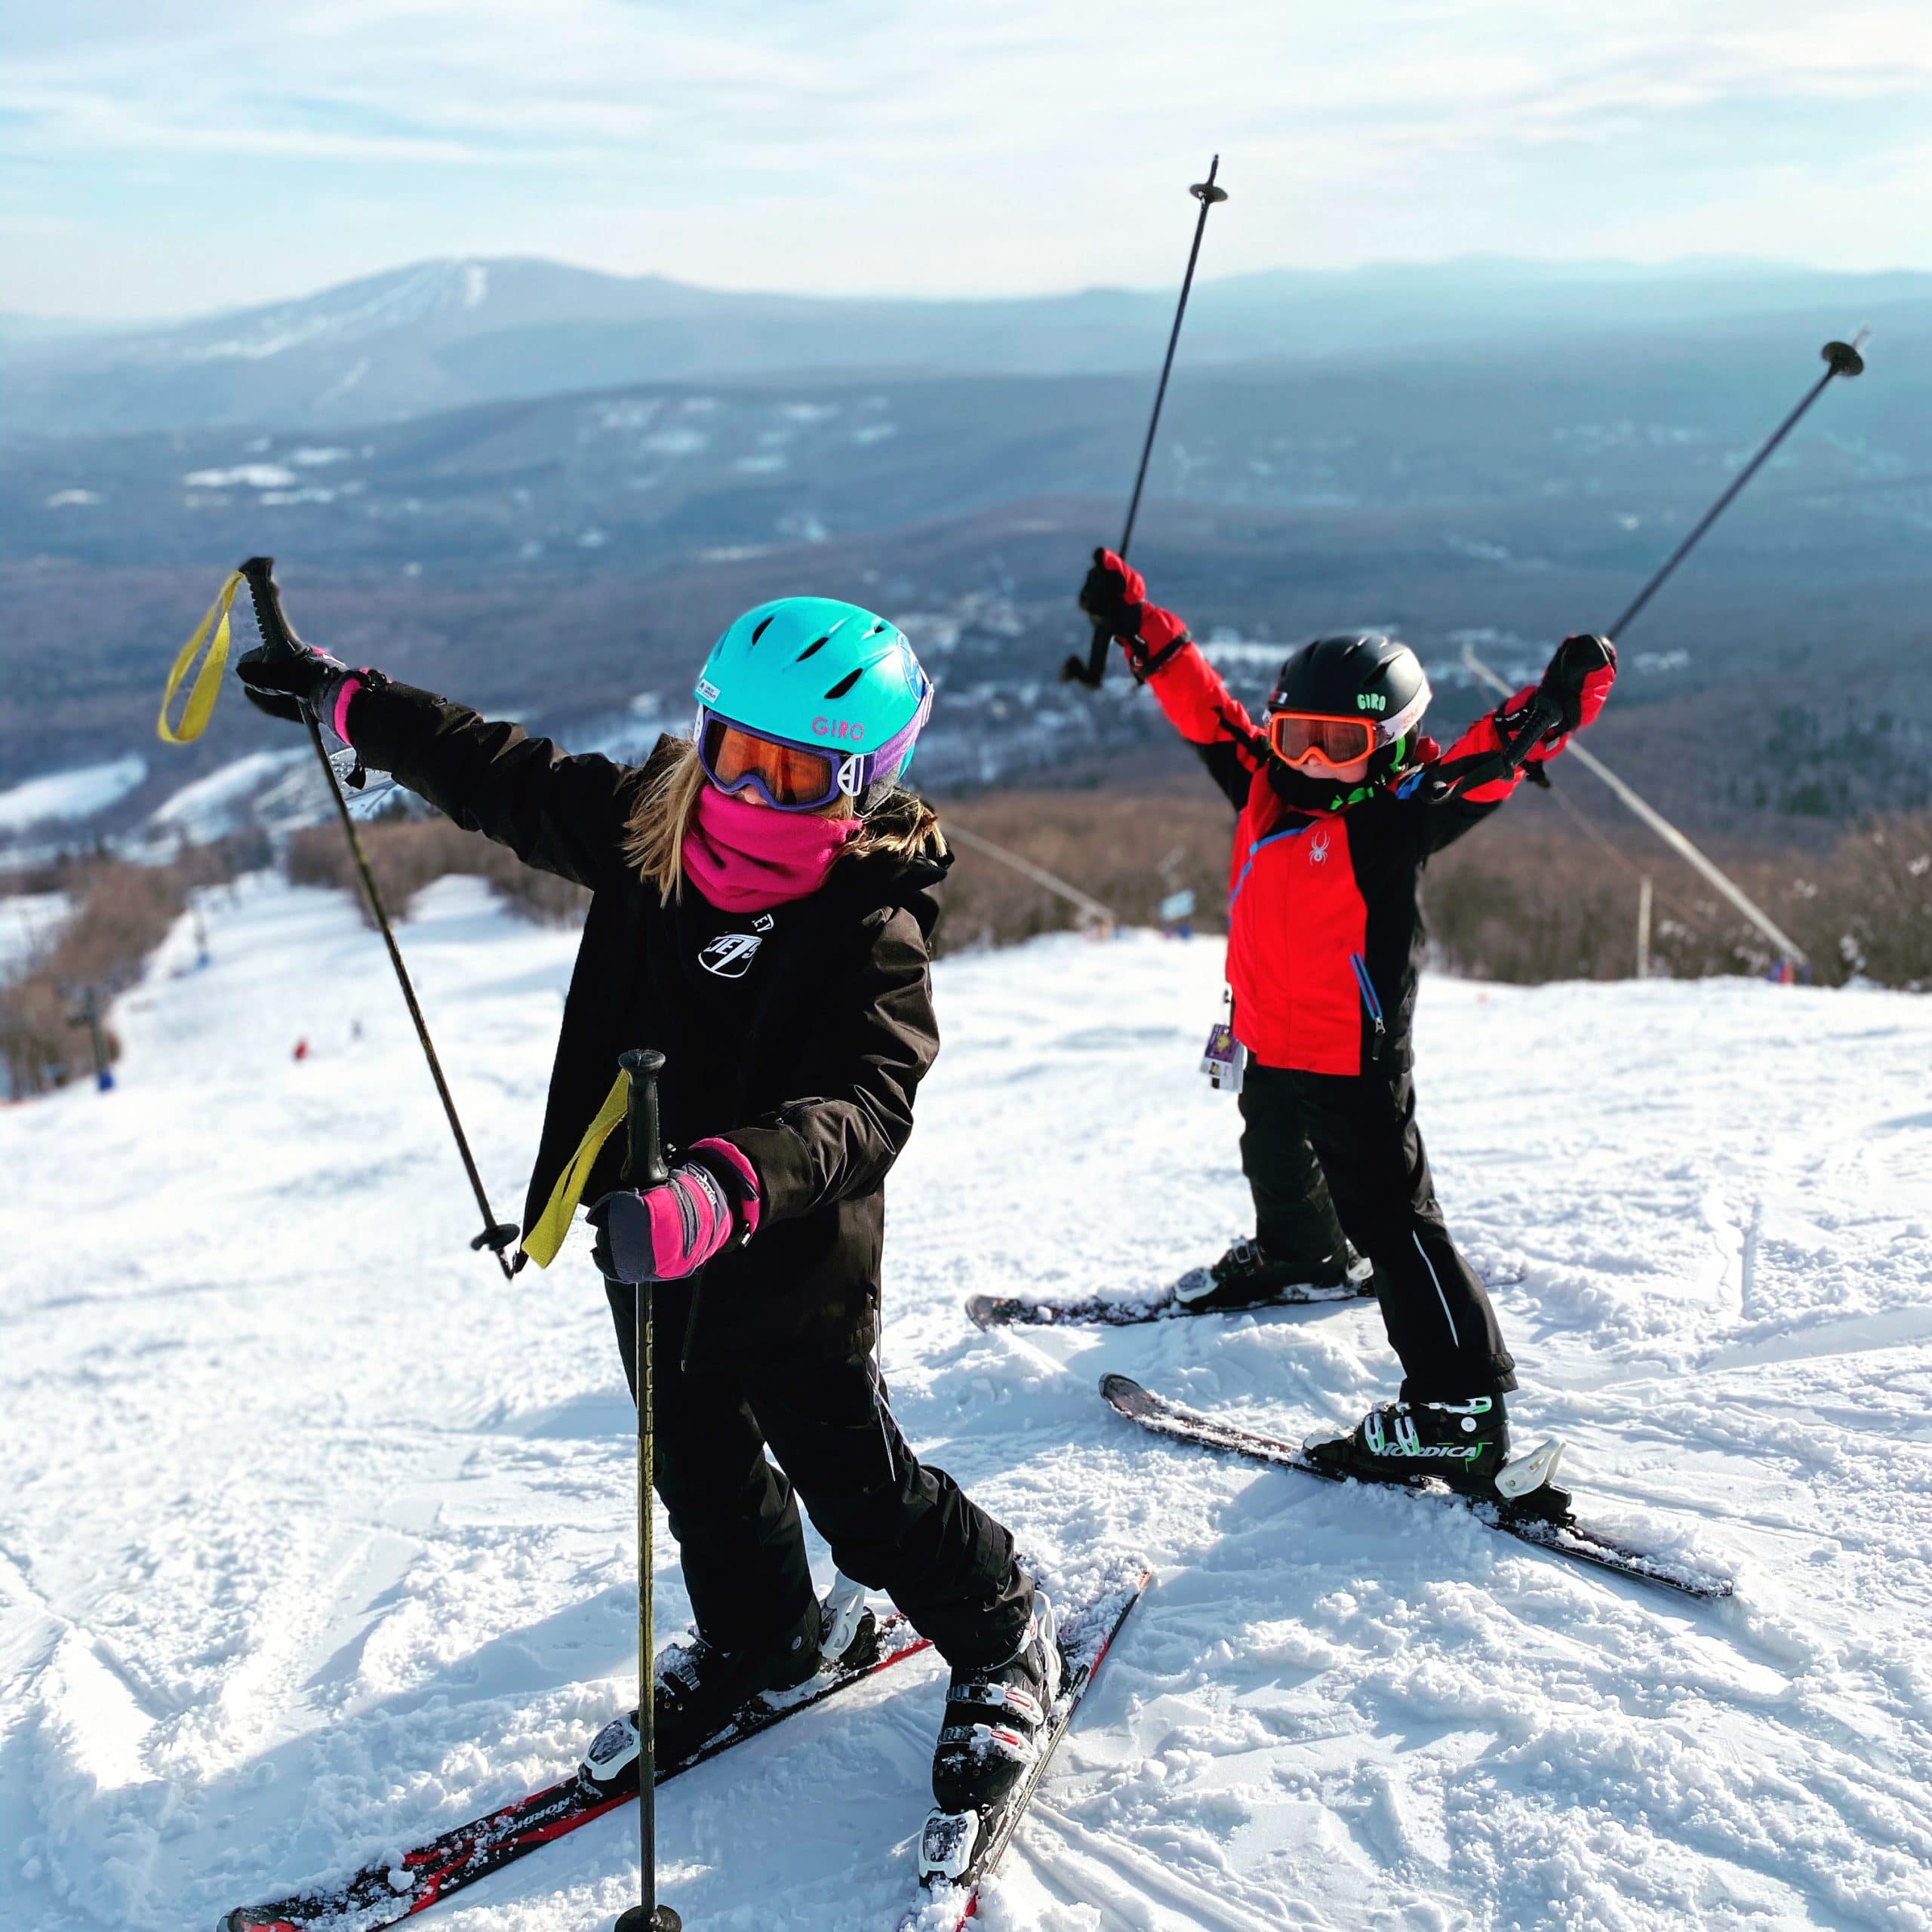 Kids happy with their ski at the top of the mountain at Bromley ski resort